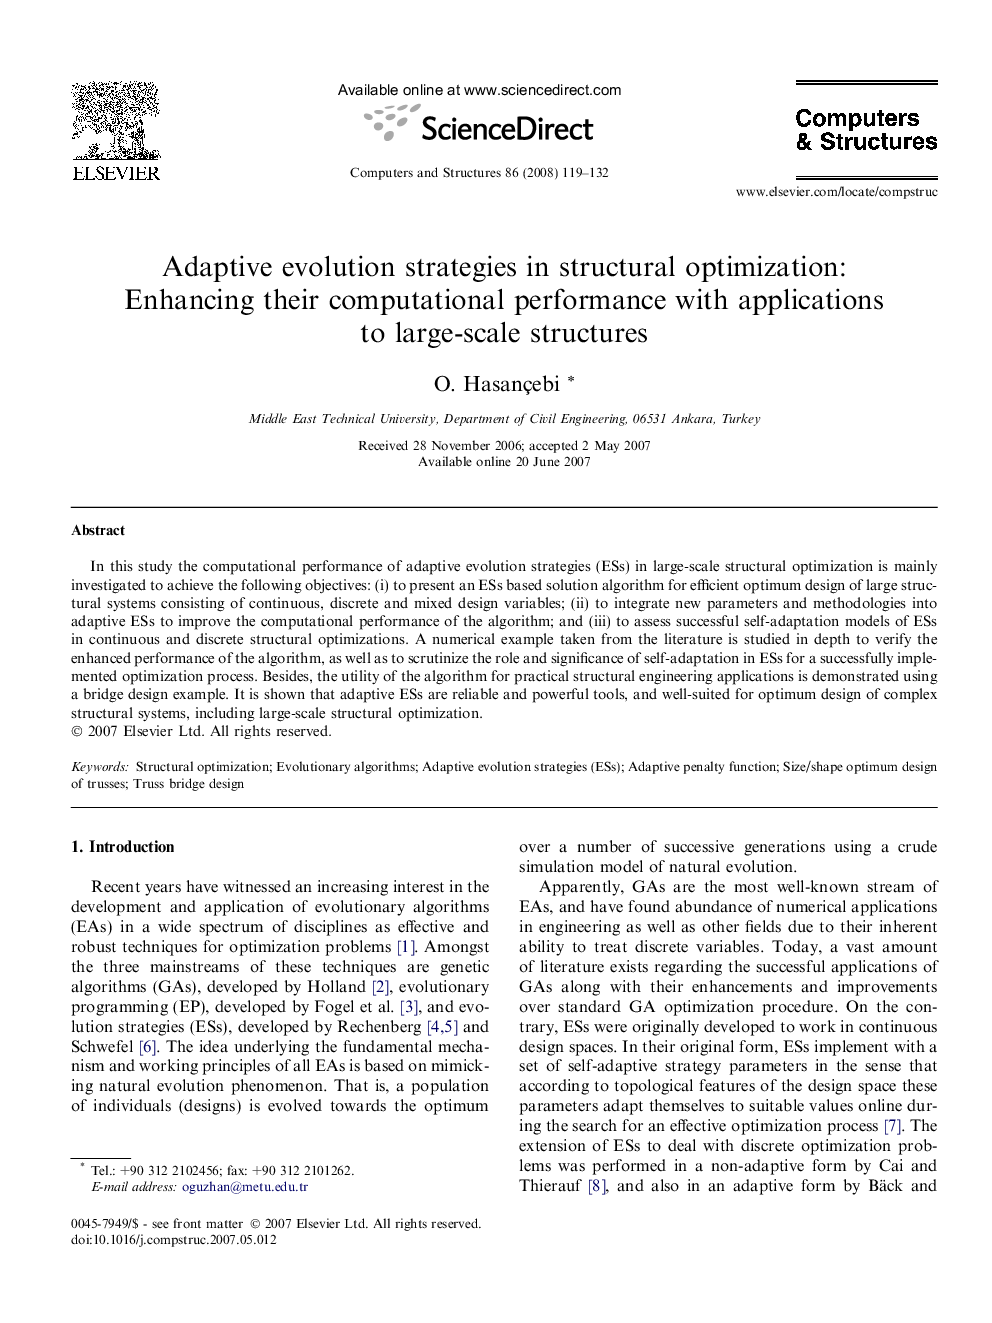 Adaptive evolution strategies in structural optimization: Enhancing their computational performance with applications to large-scale structures